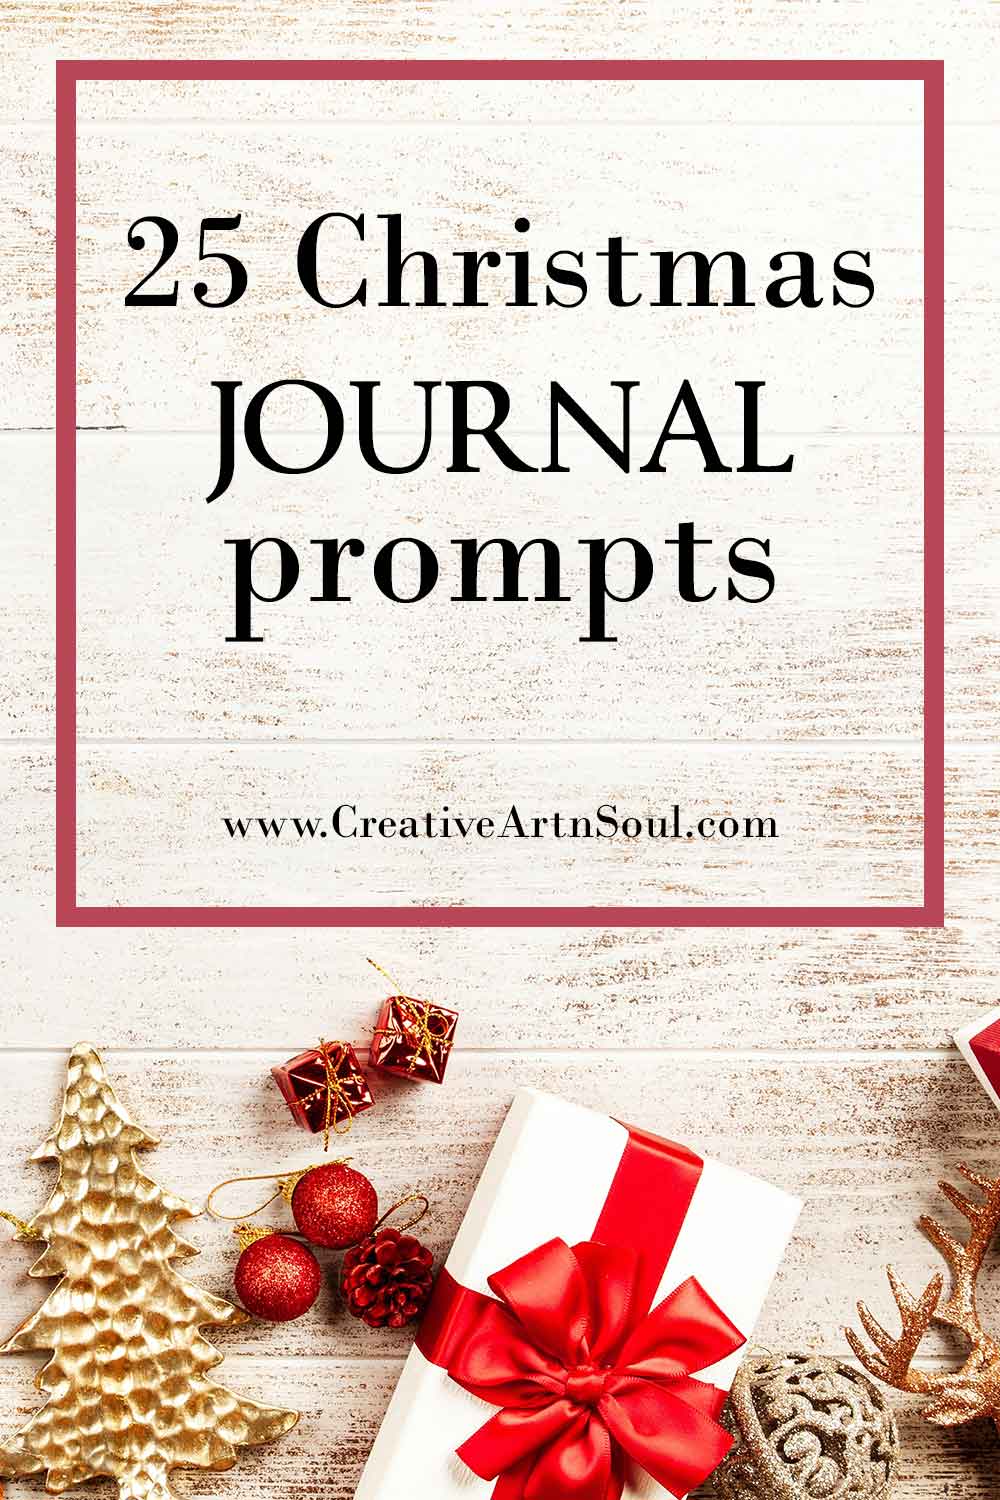 25 Christmas Journal Prompts